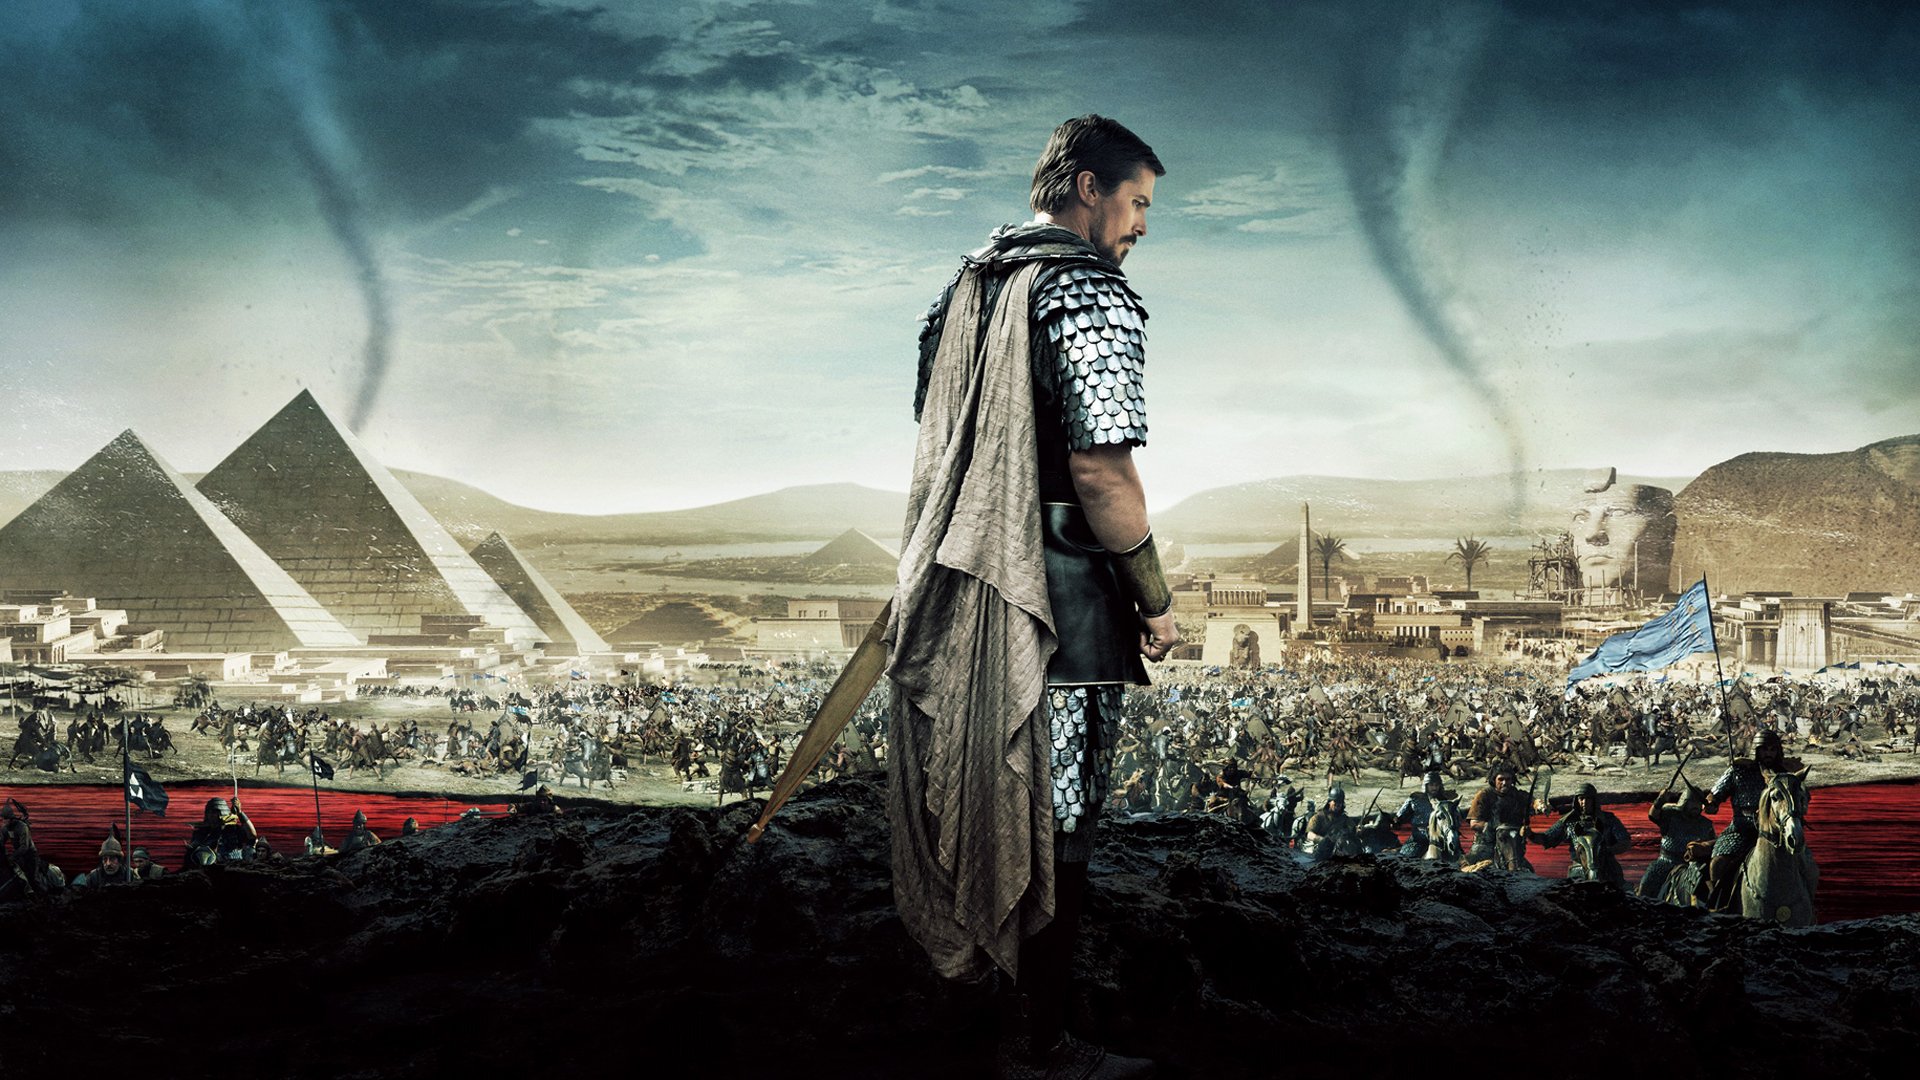 Download Christian Bale Movie Exodus: Gods And Kings  HD Wallpaper